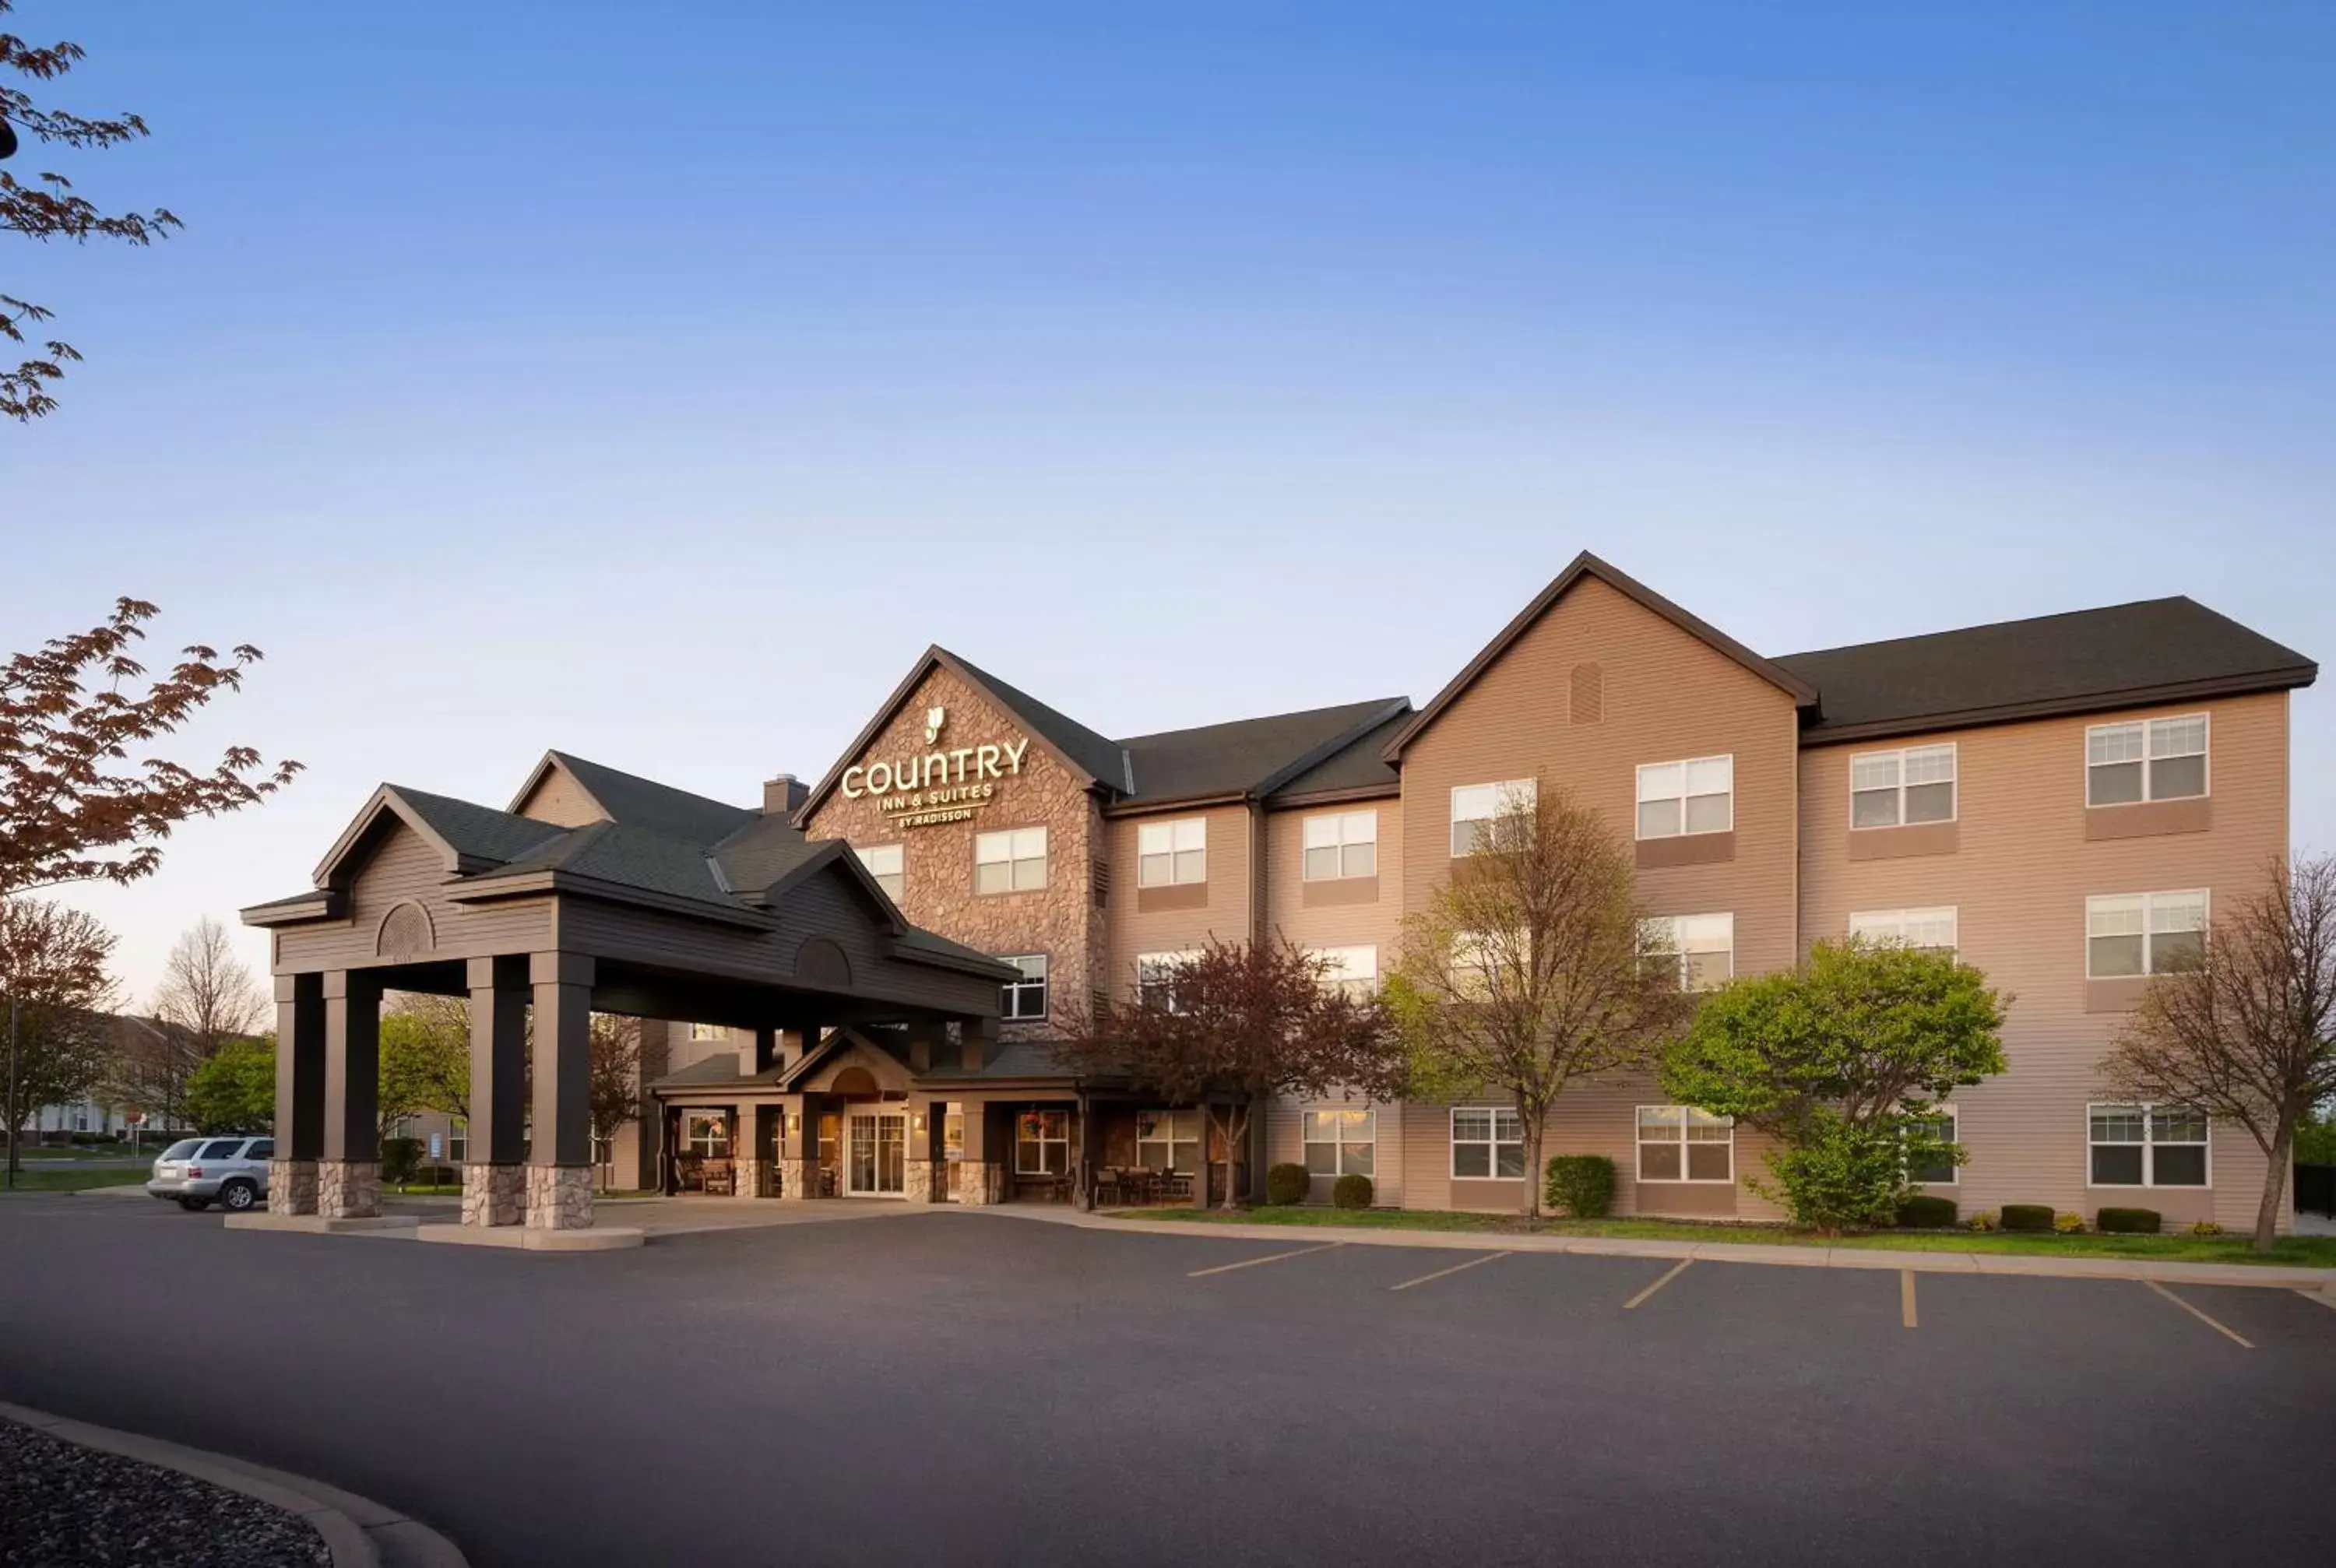 Property Building in Country Inn & Suites by Radisson, Albertville, MN